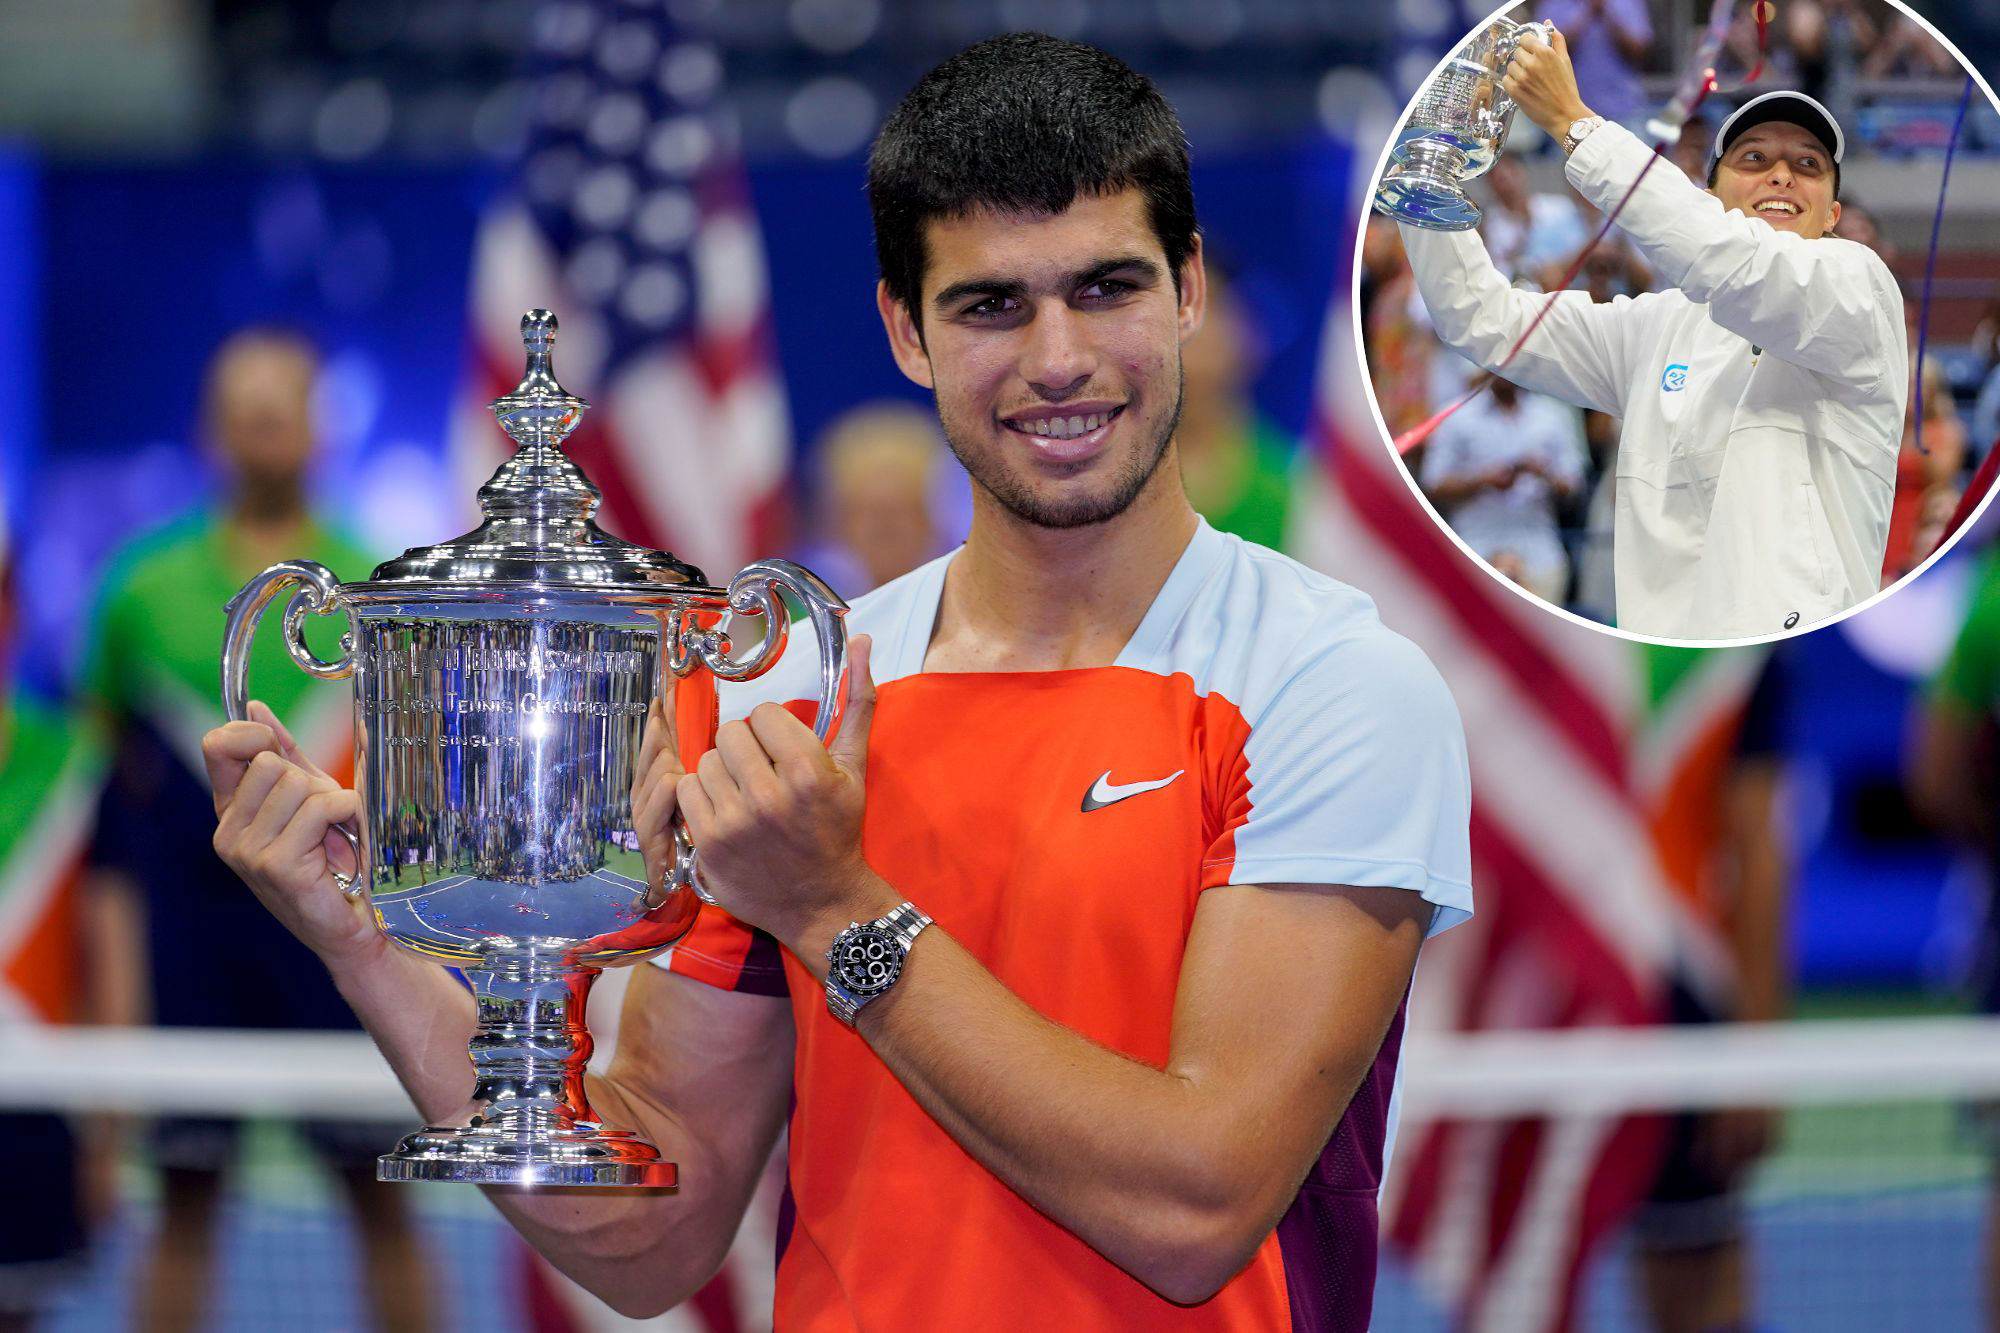 US Open tennis prize money, player compensation raise to record high